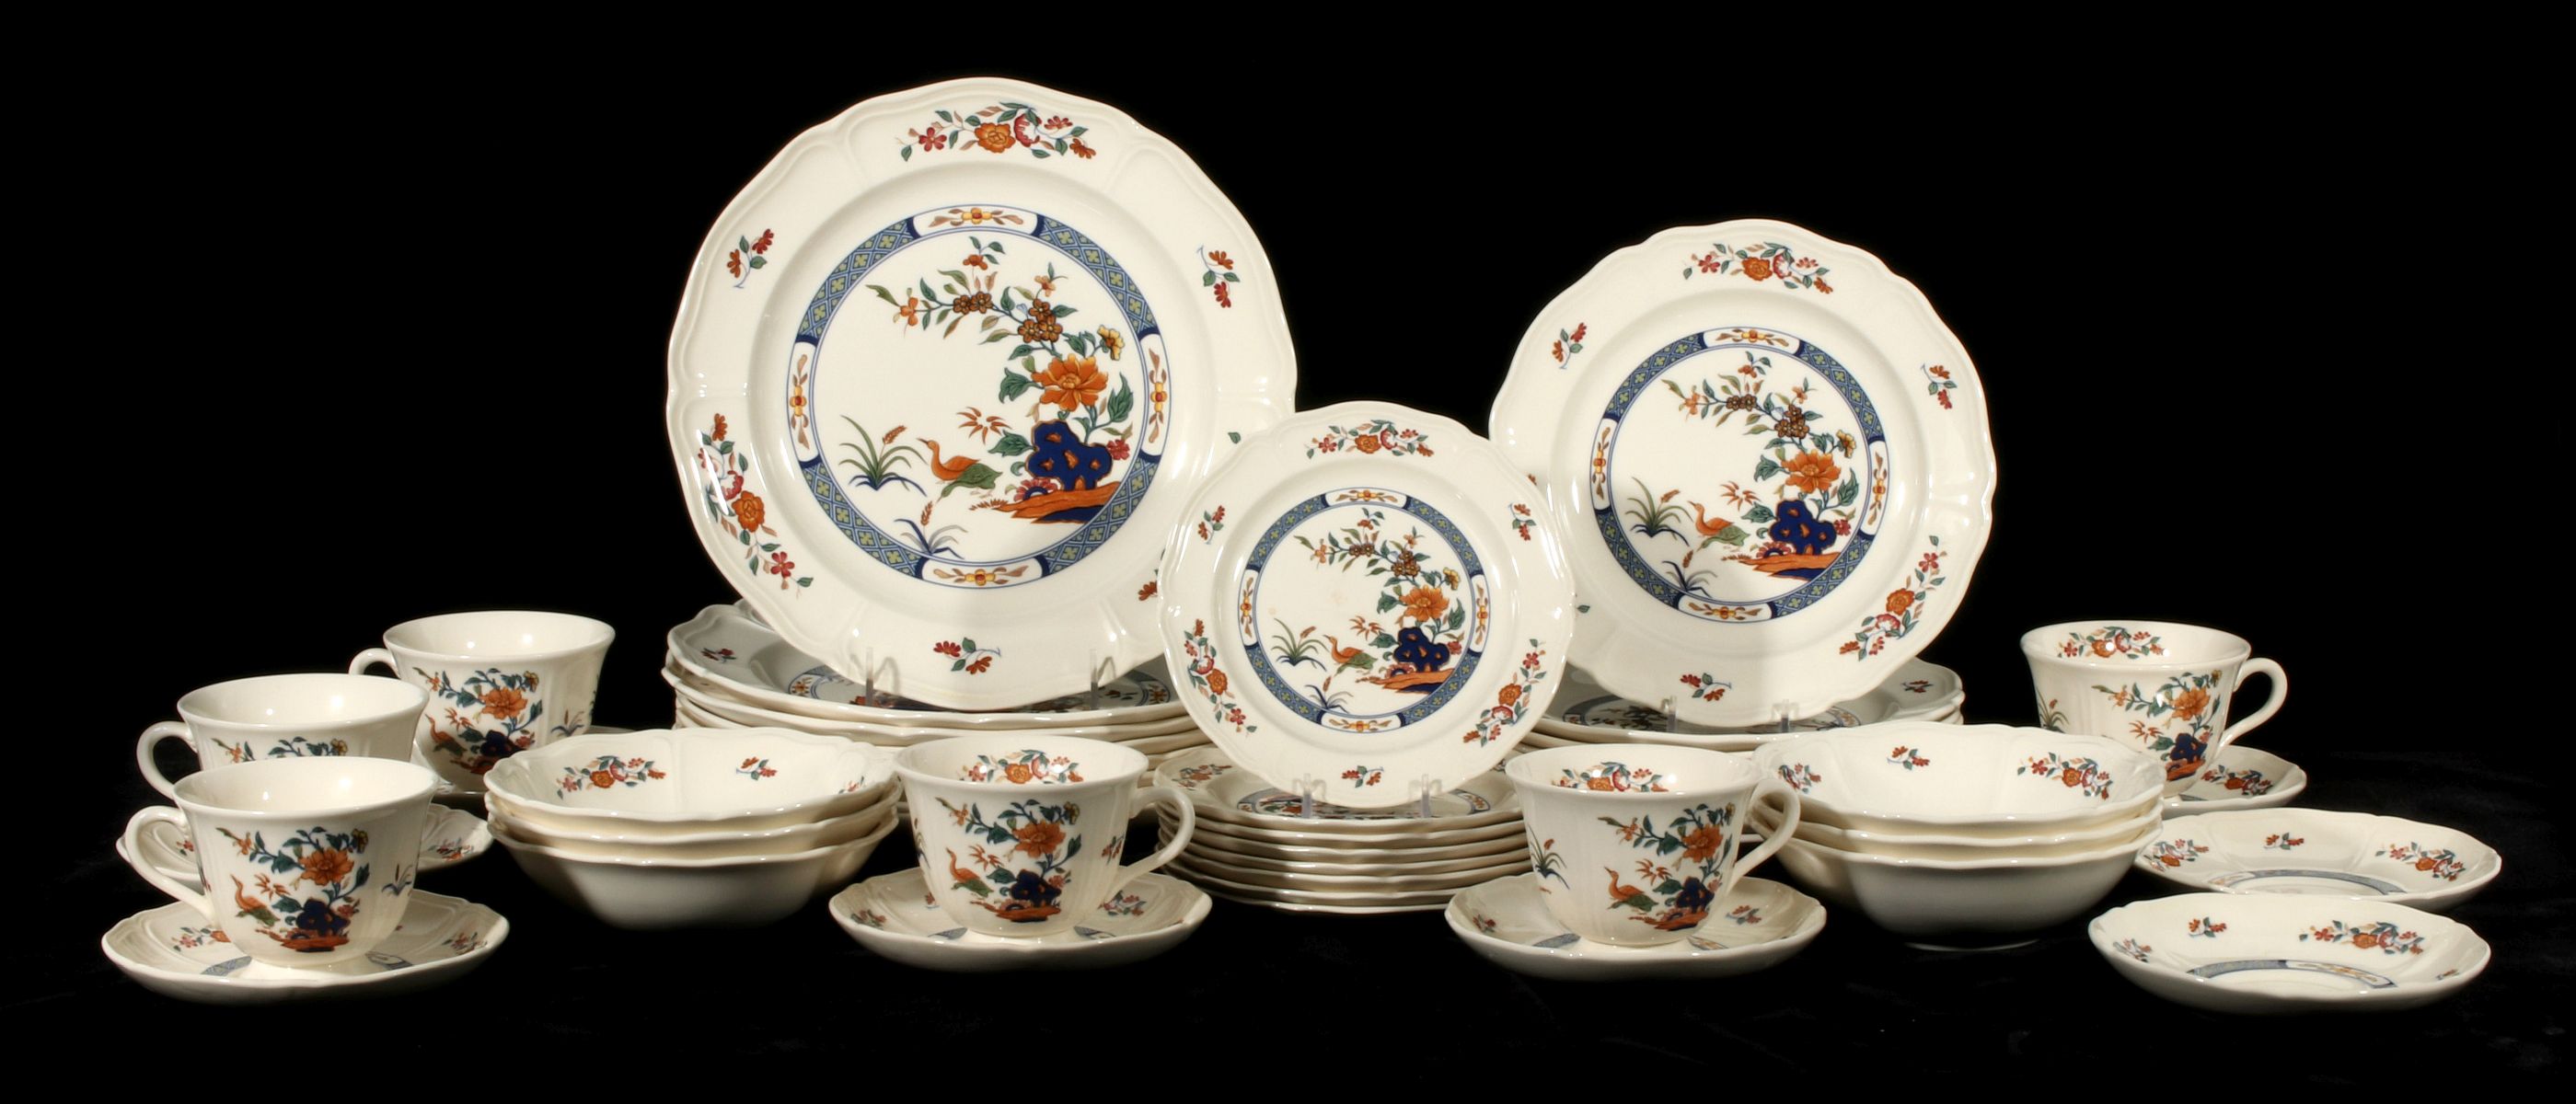 A WEDGWOOD CHINESE TEAL PATTERN CHINA SERVICE